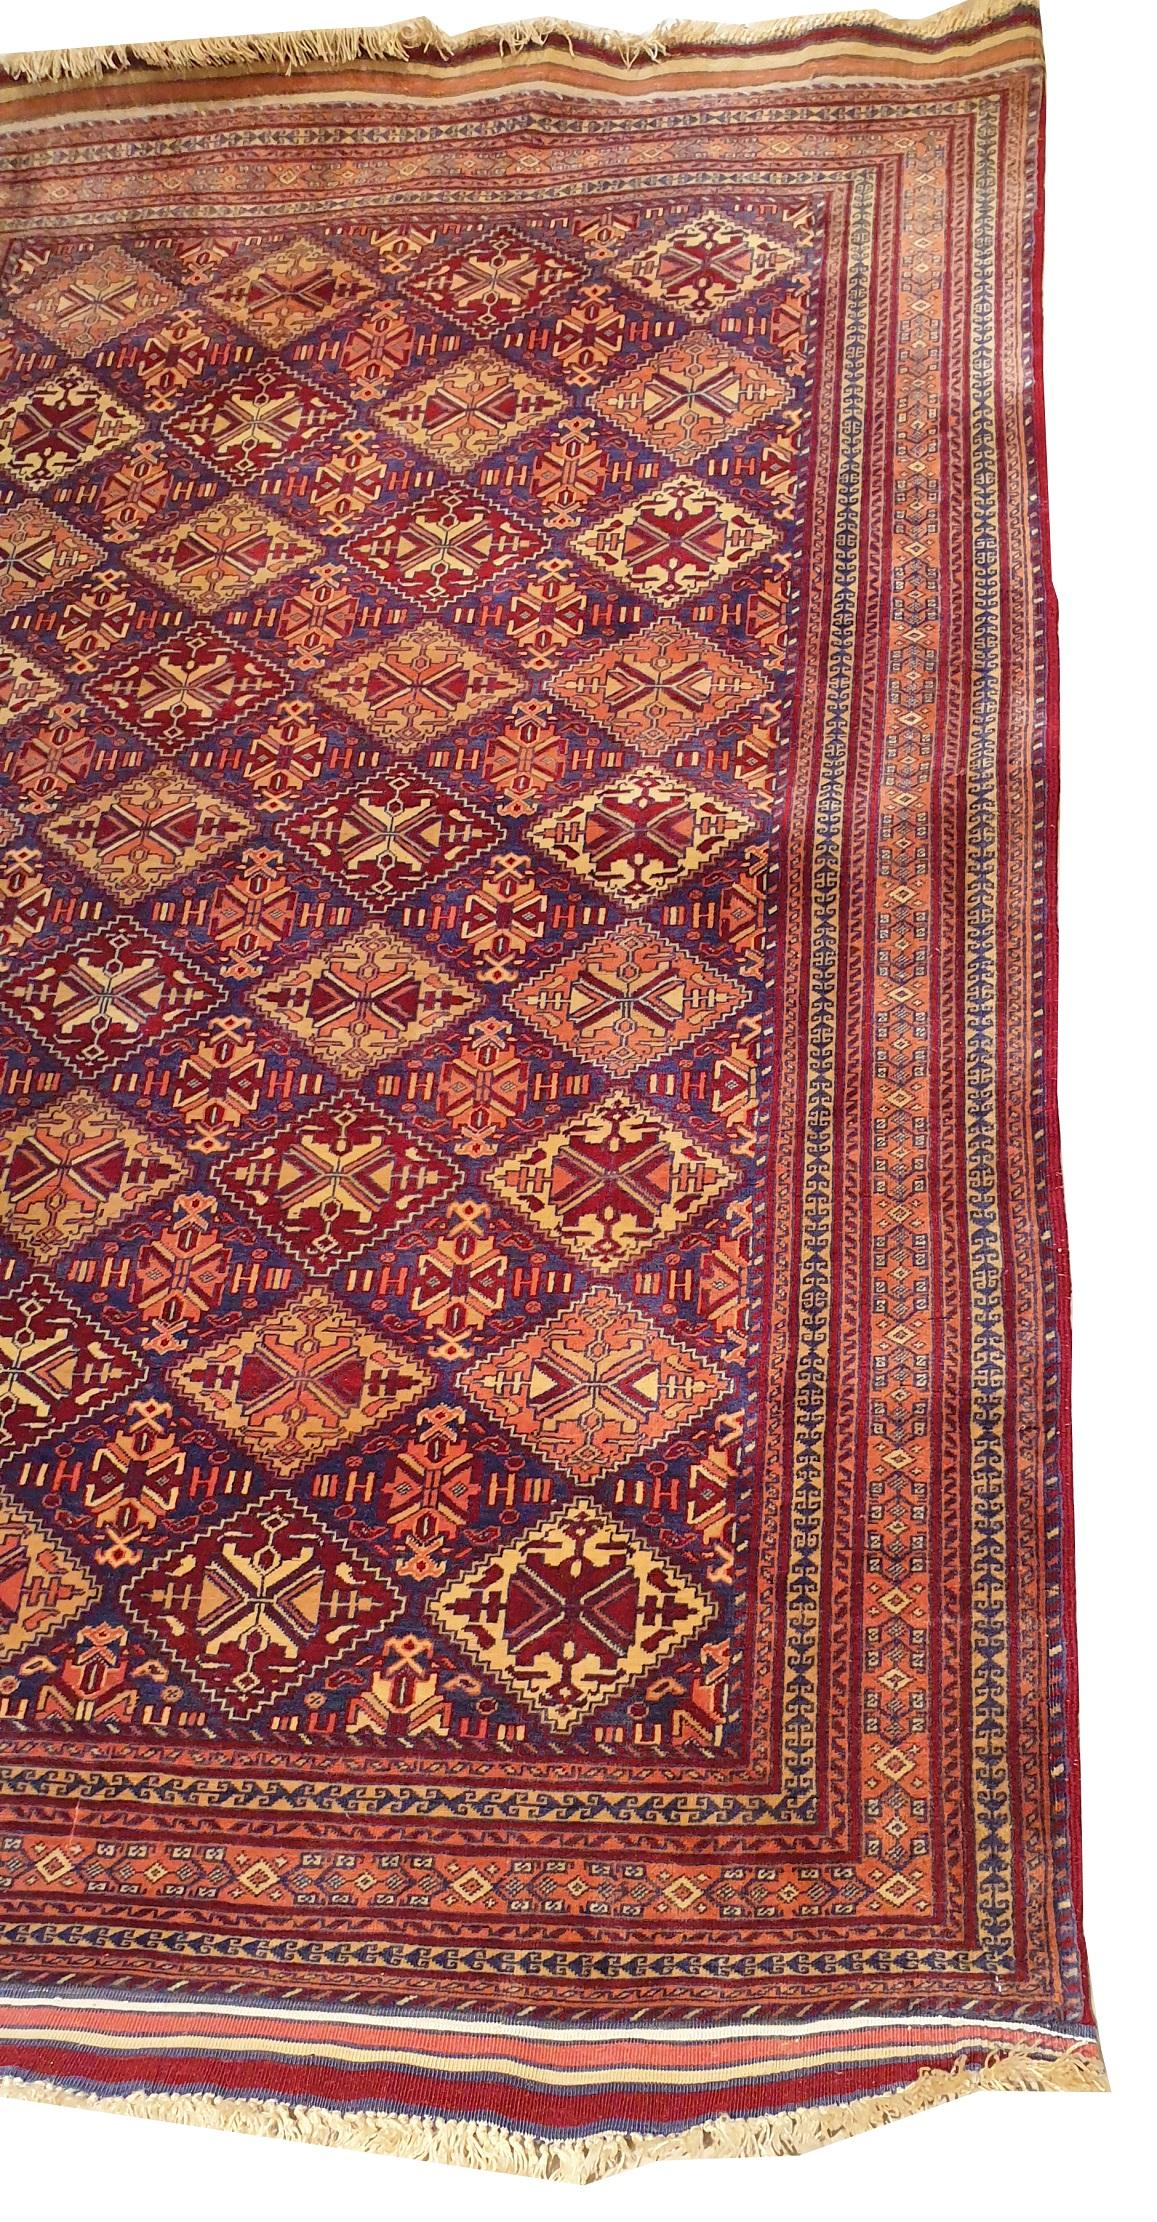 739 - beautiful Turkmen Bukhara carpet from the 20th century very decorative with a nice geometric design with Bukhara Guls and a red field with blue, finely knotted by hand with woolen velvet on a wool background.